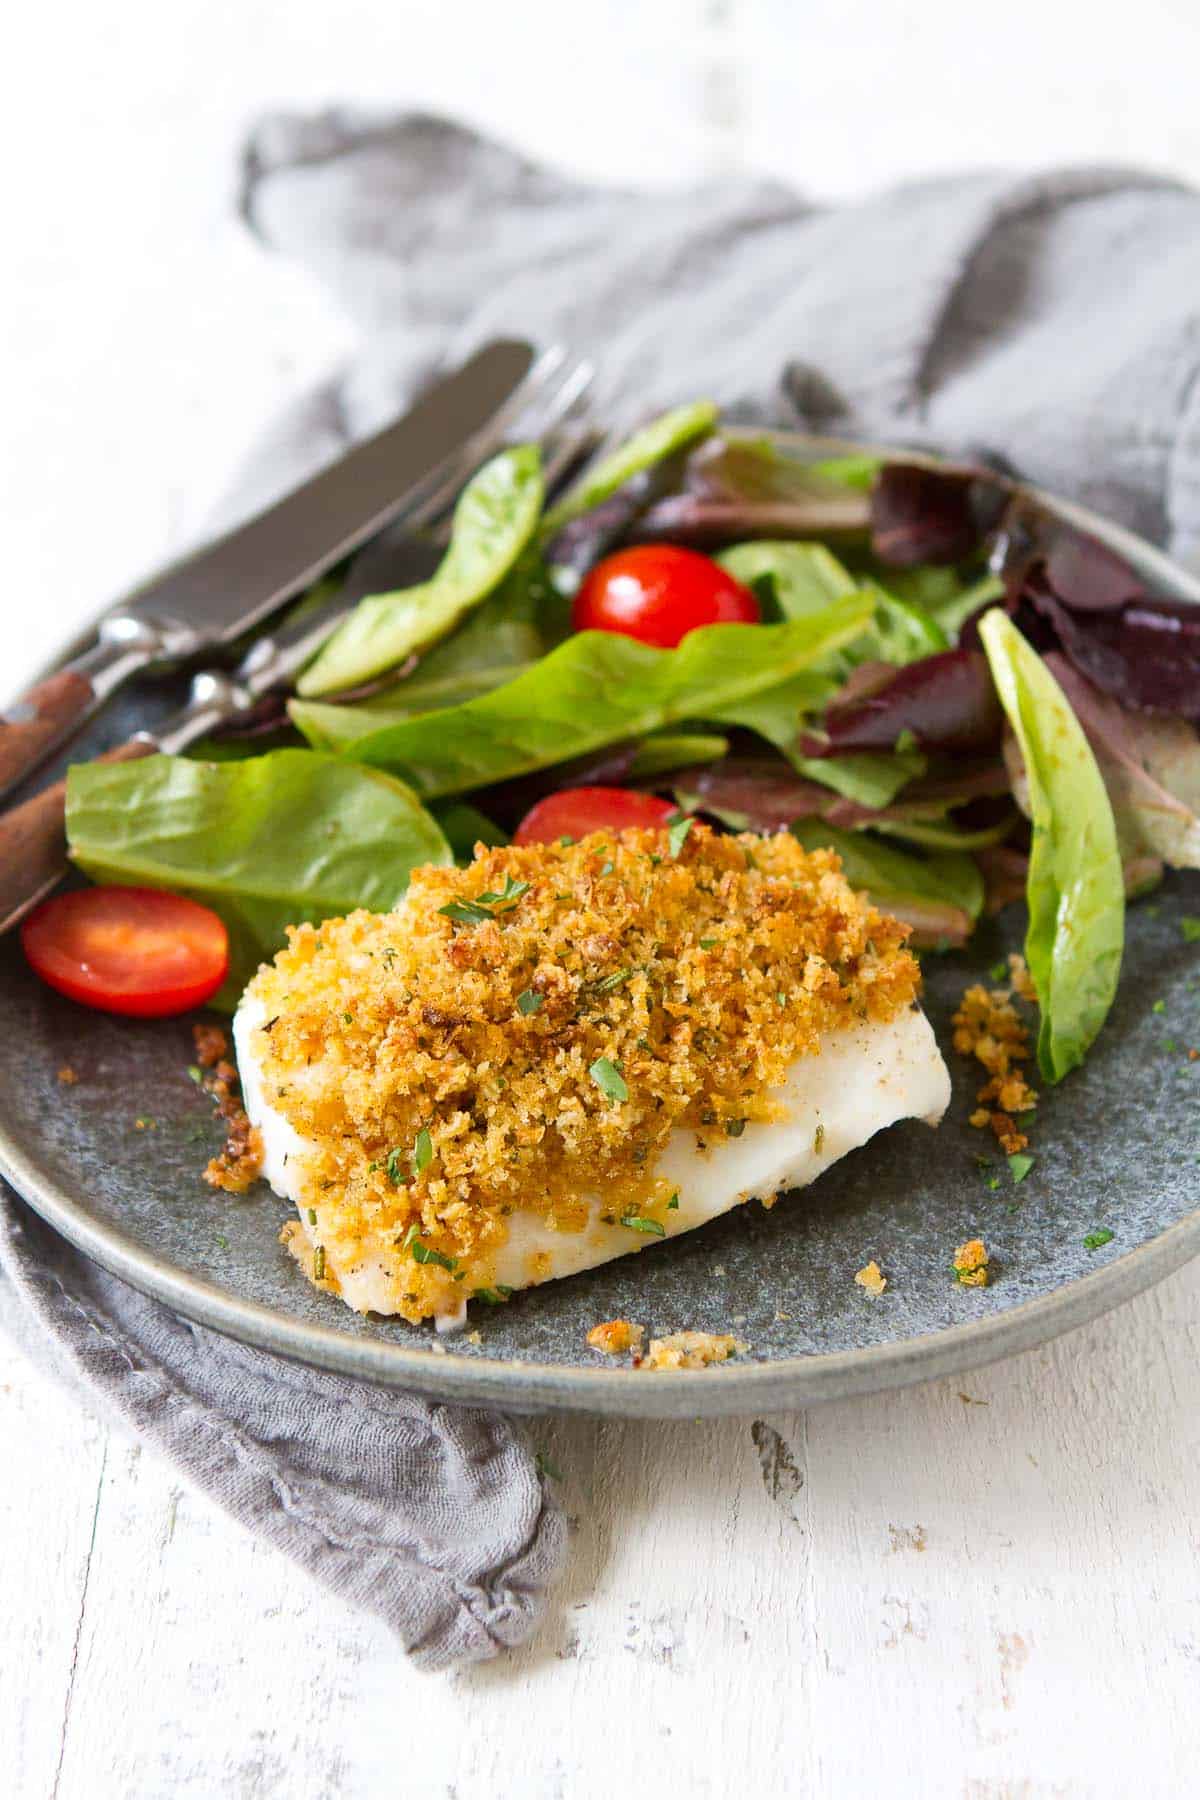 Baked breaded cod with a side salad on a gray plate.